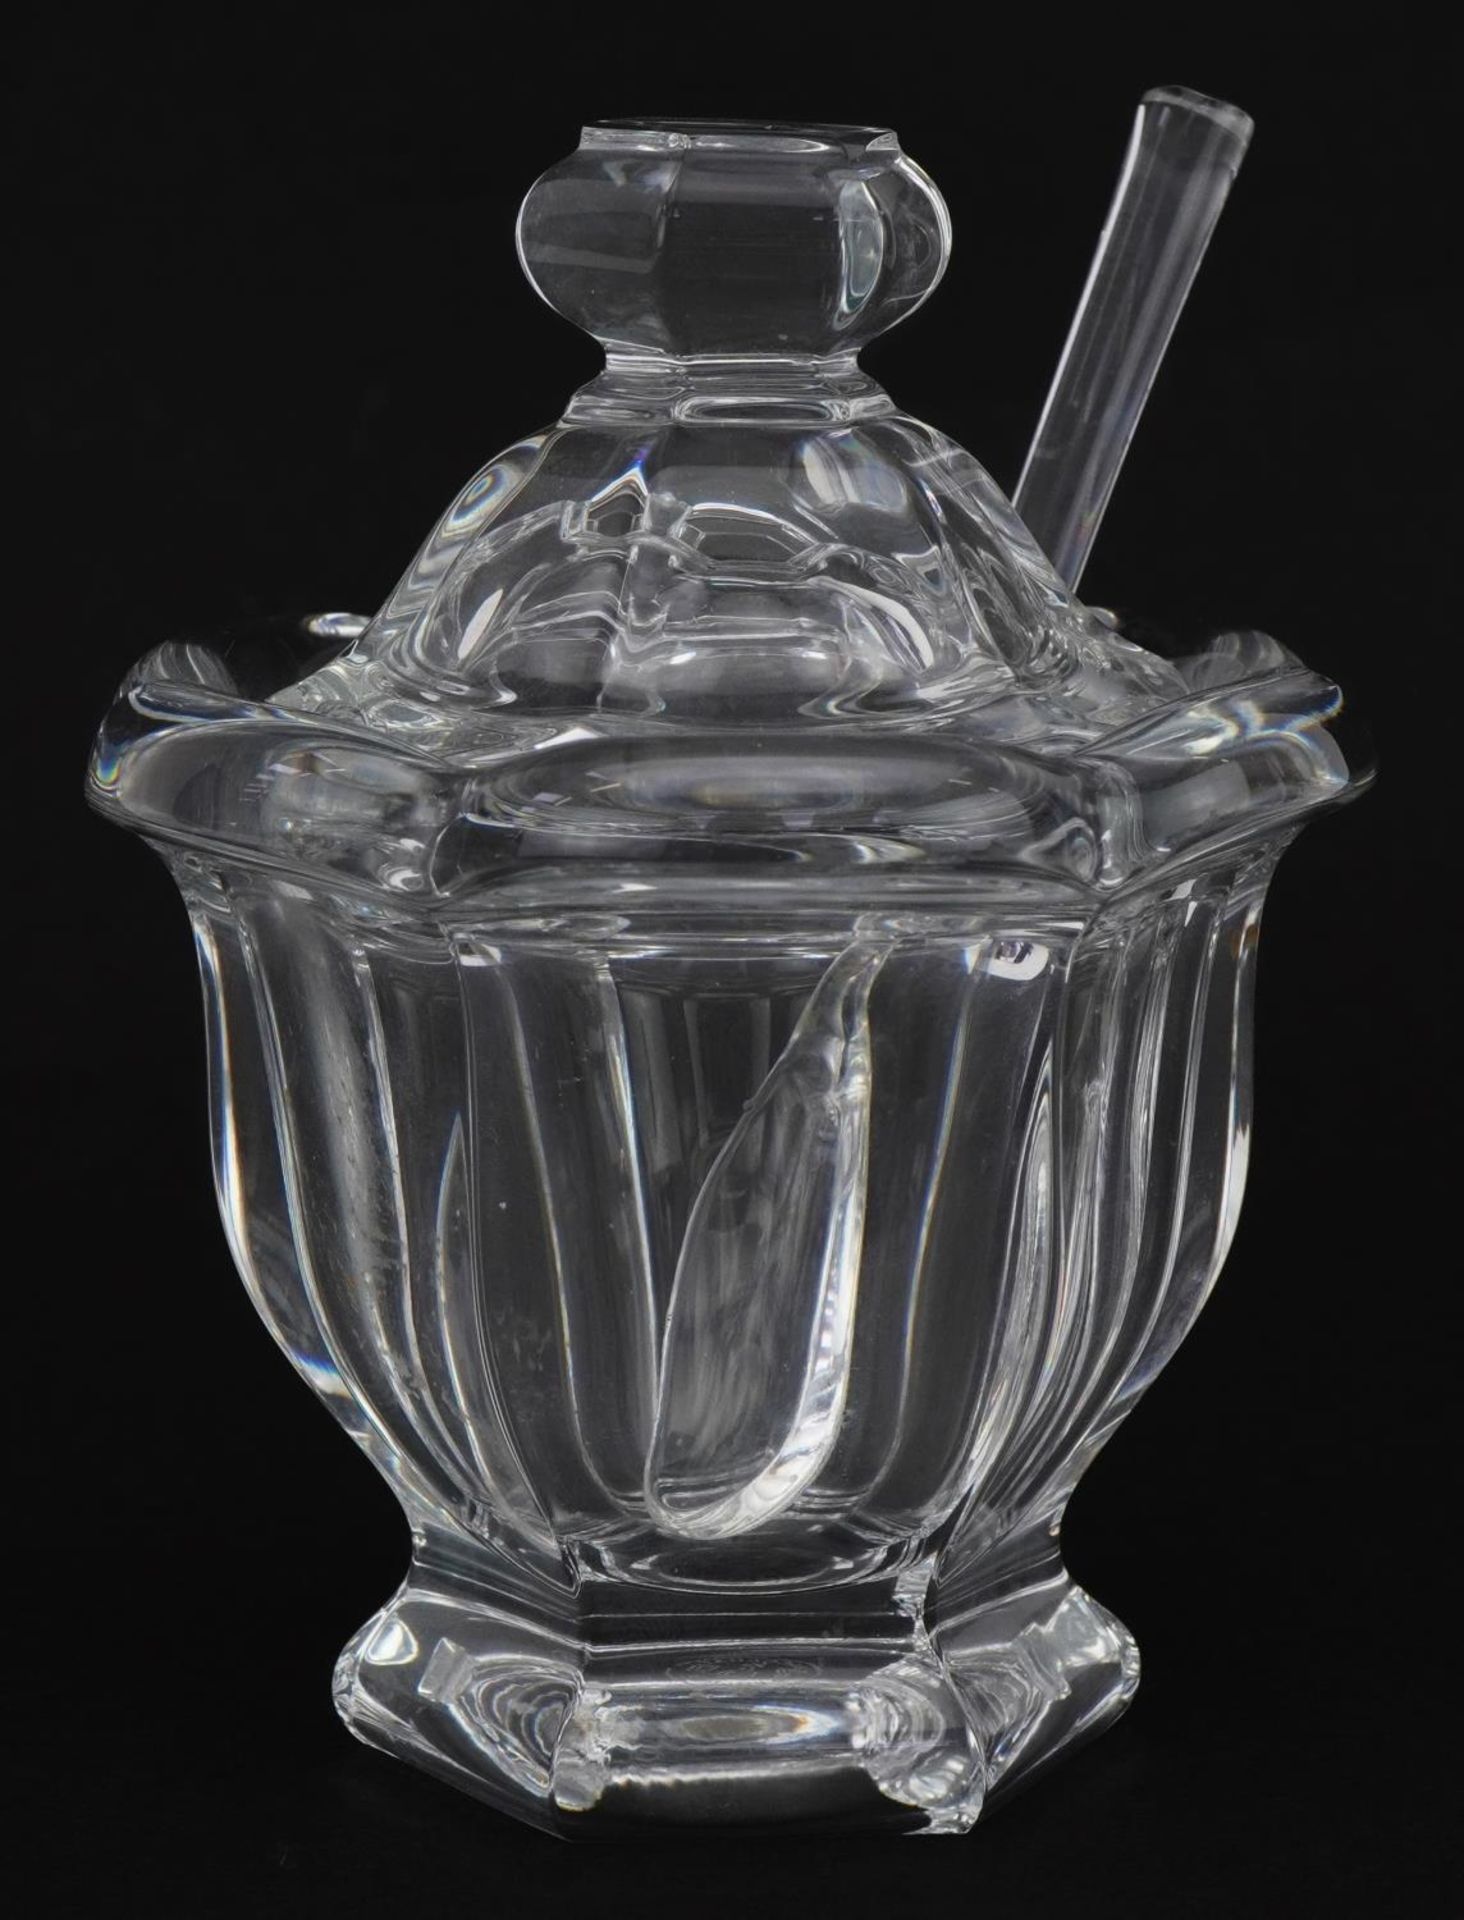 Baccarat, French crystal sauce lidded preserve pot with spoon, 11.5cm high - Image 2 of 8